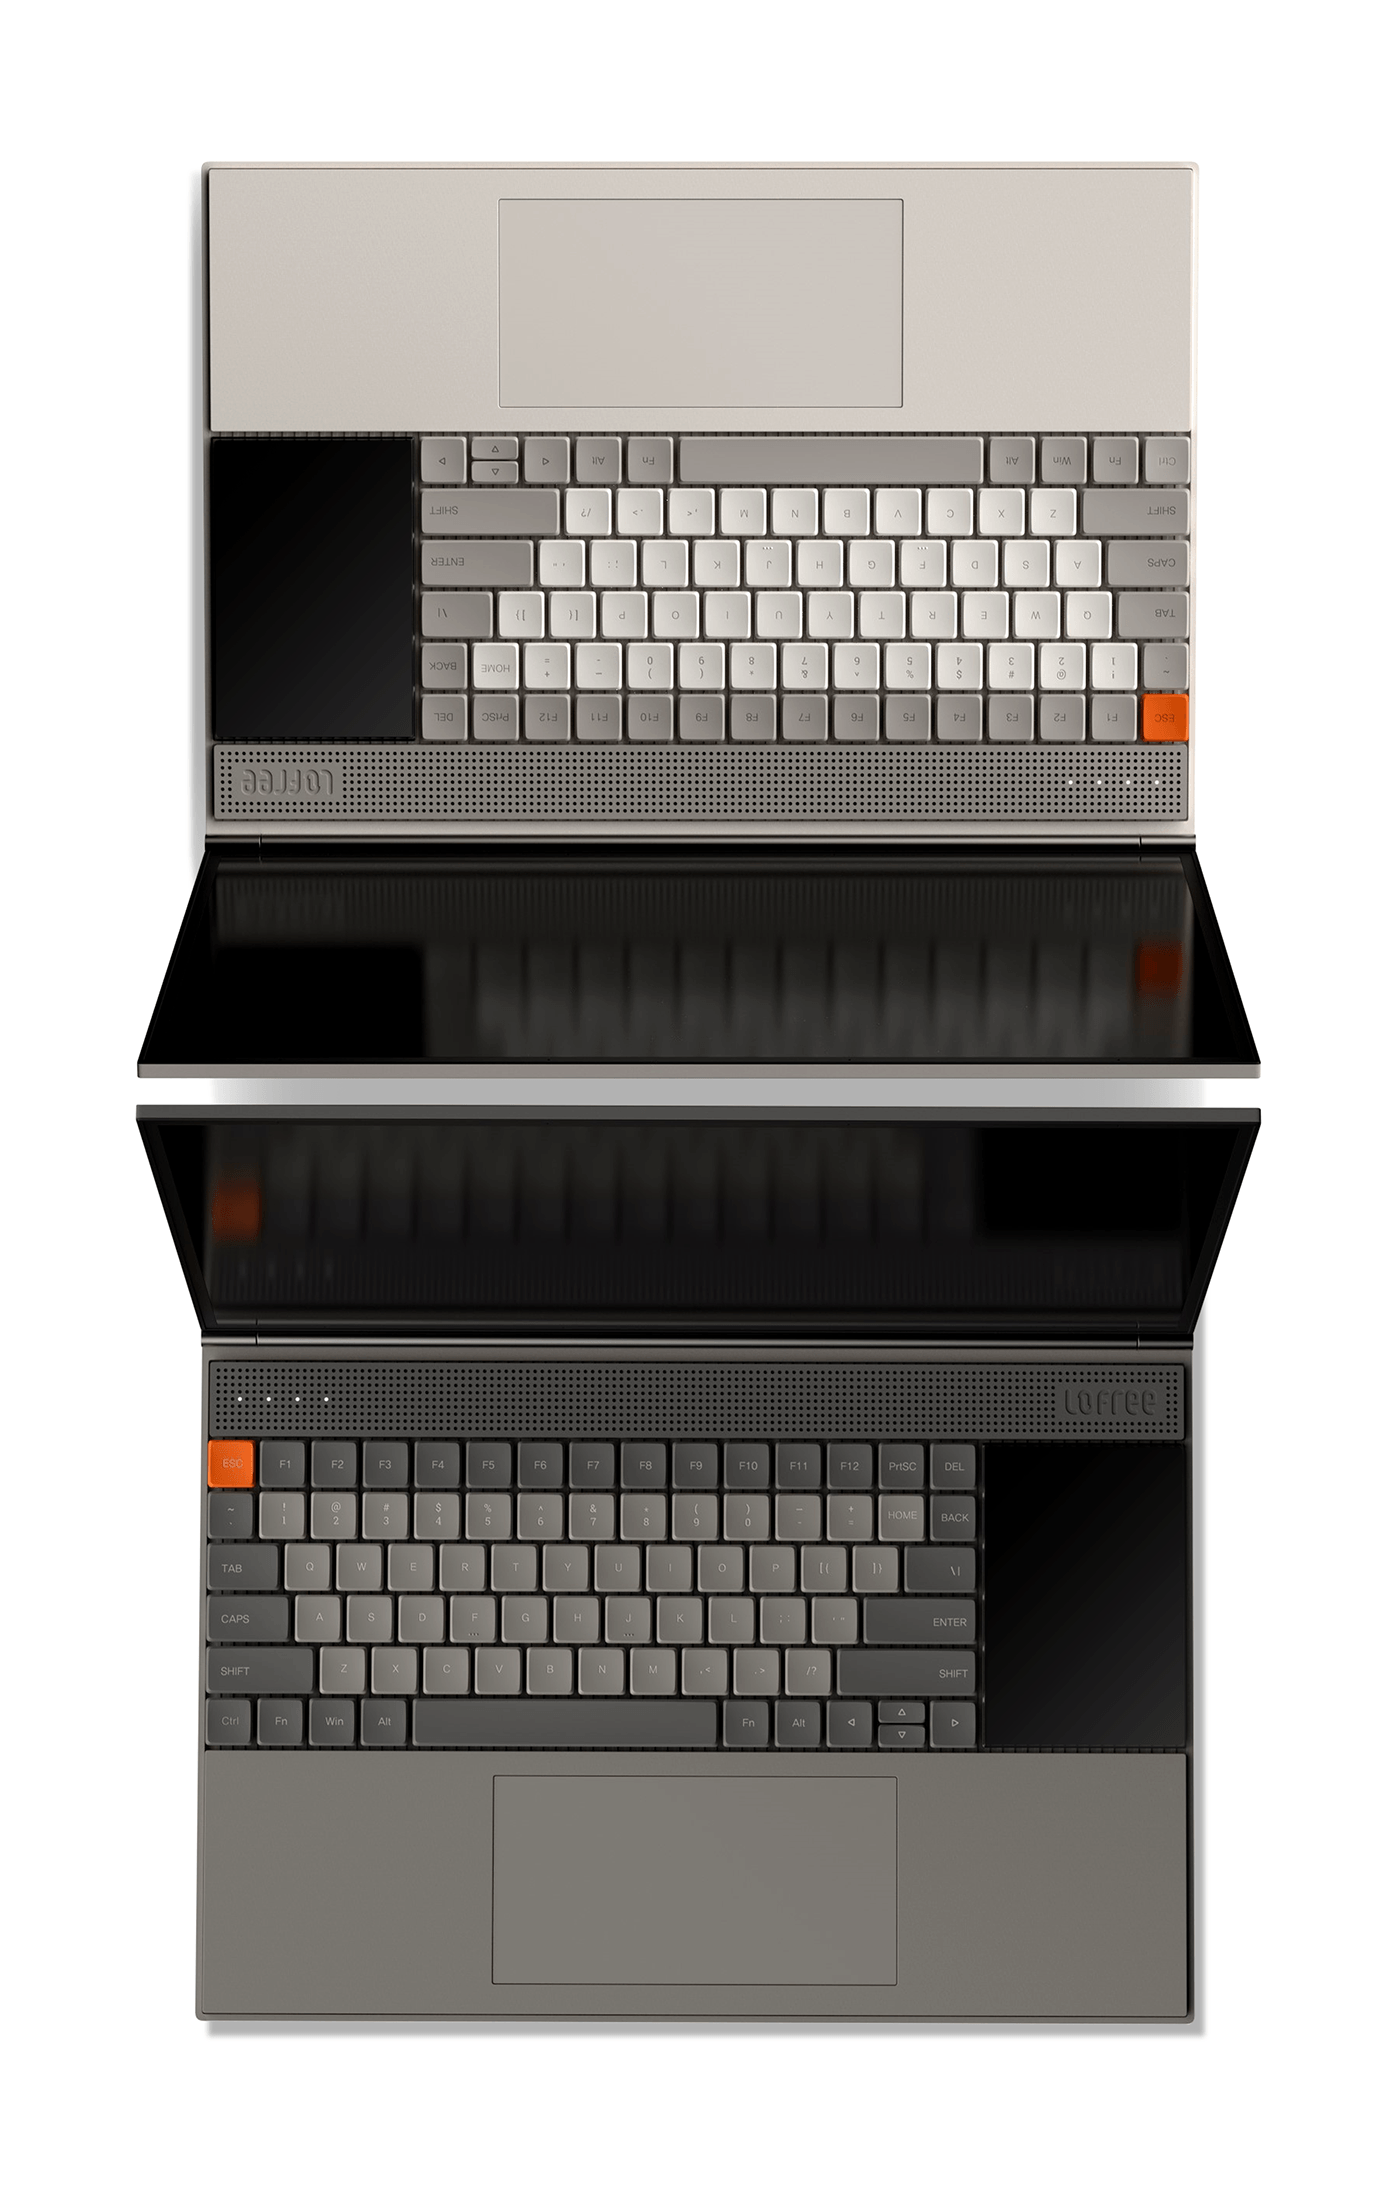 Laptop Computer Technology design keyboard lofree industrial design  product concept electronic device